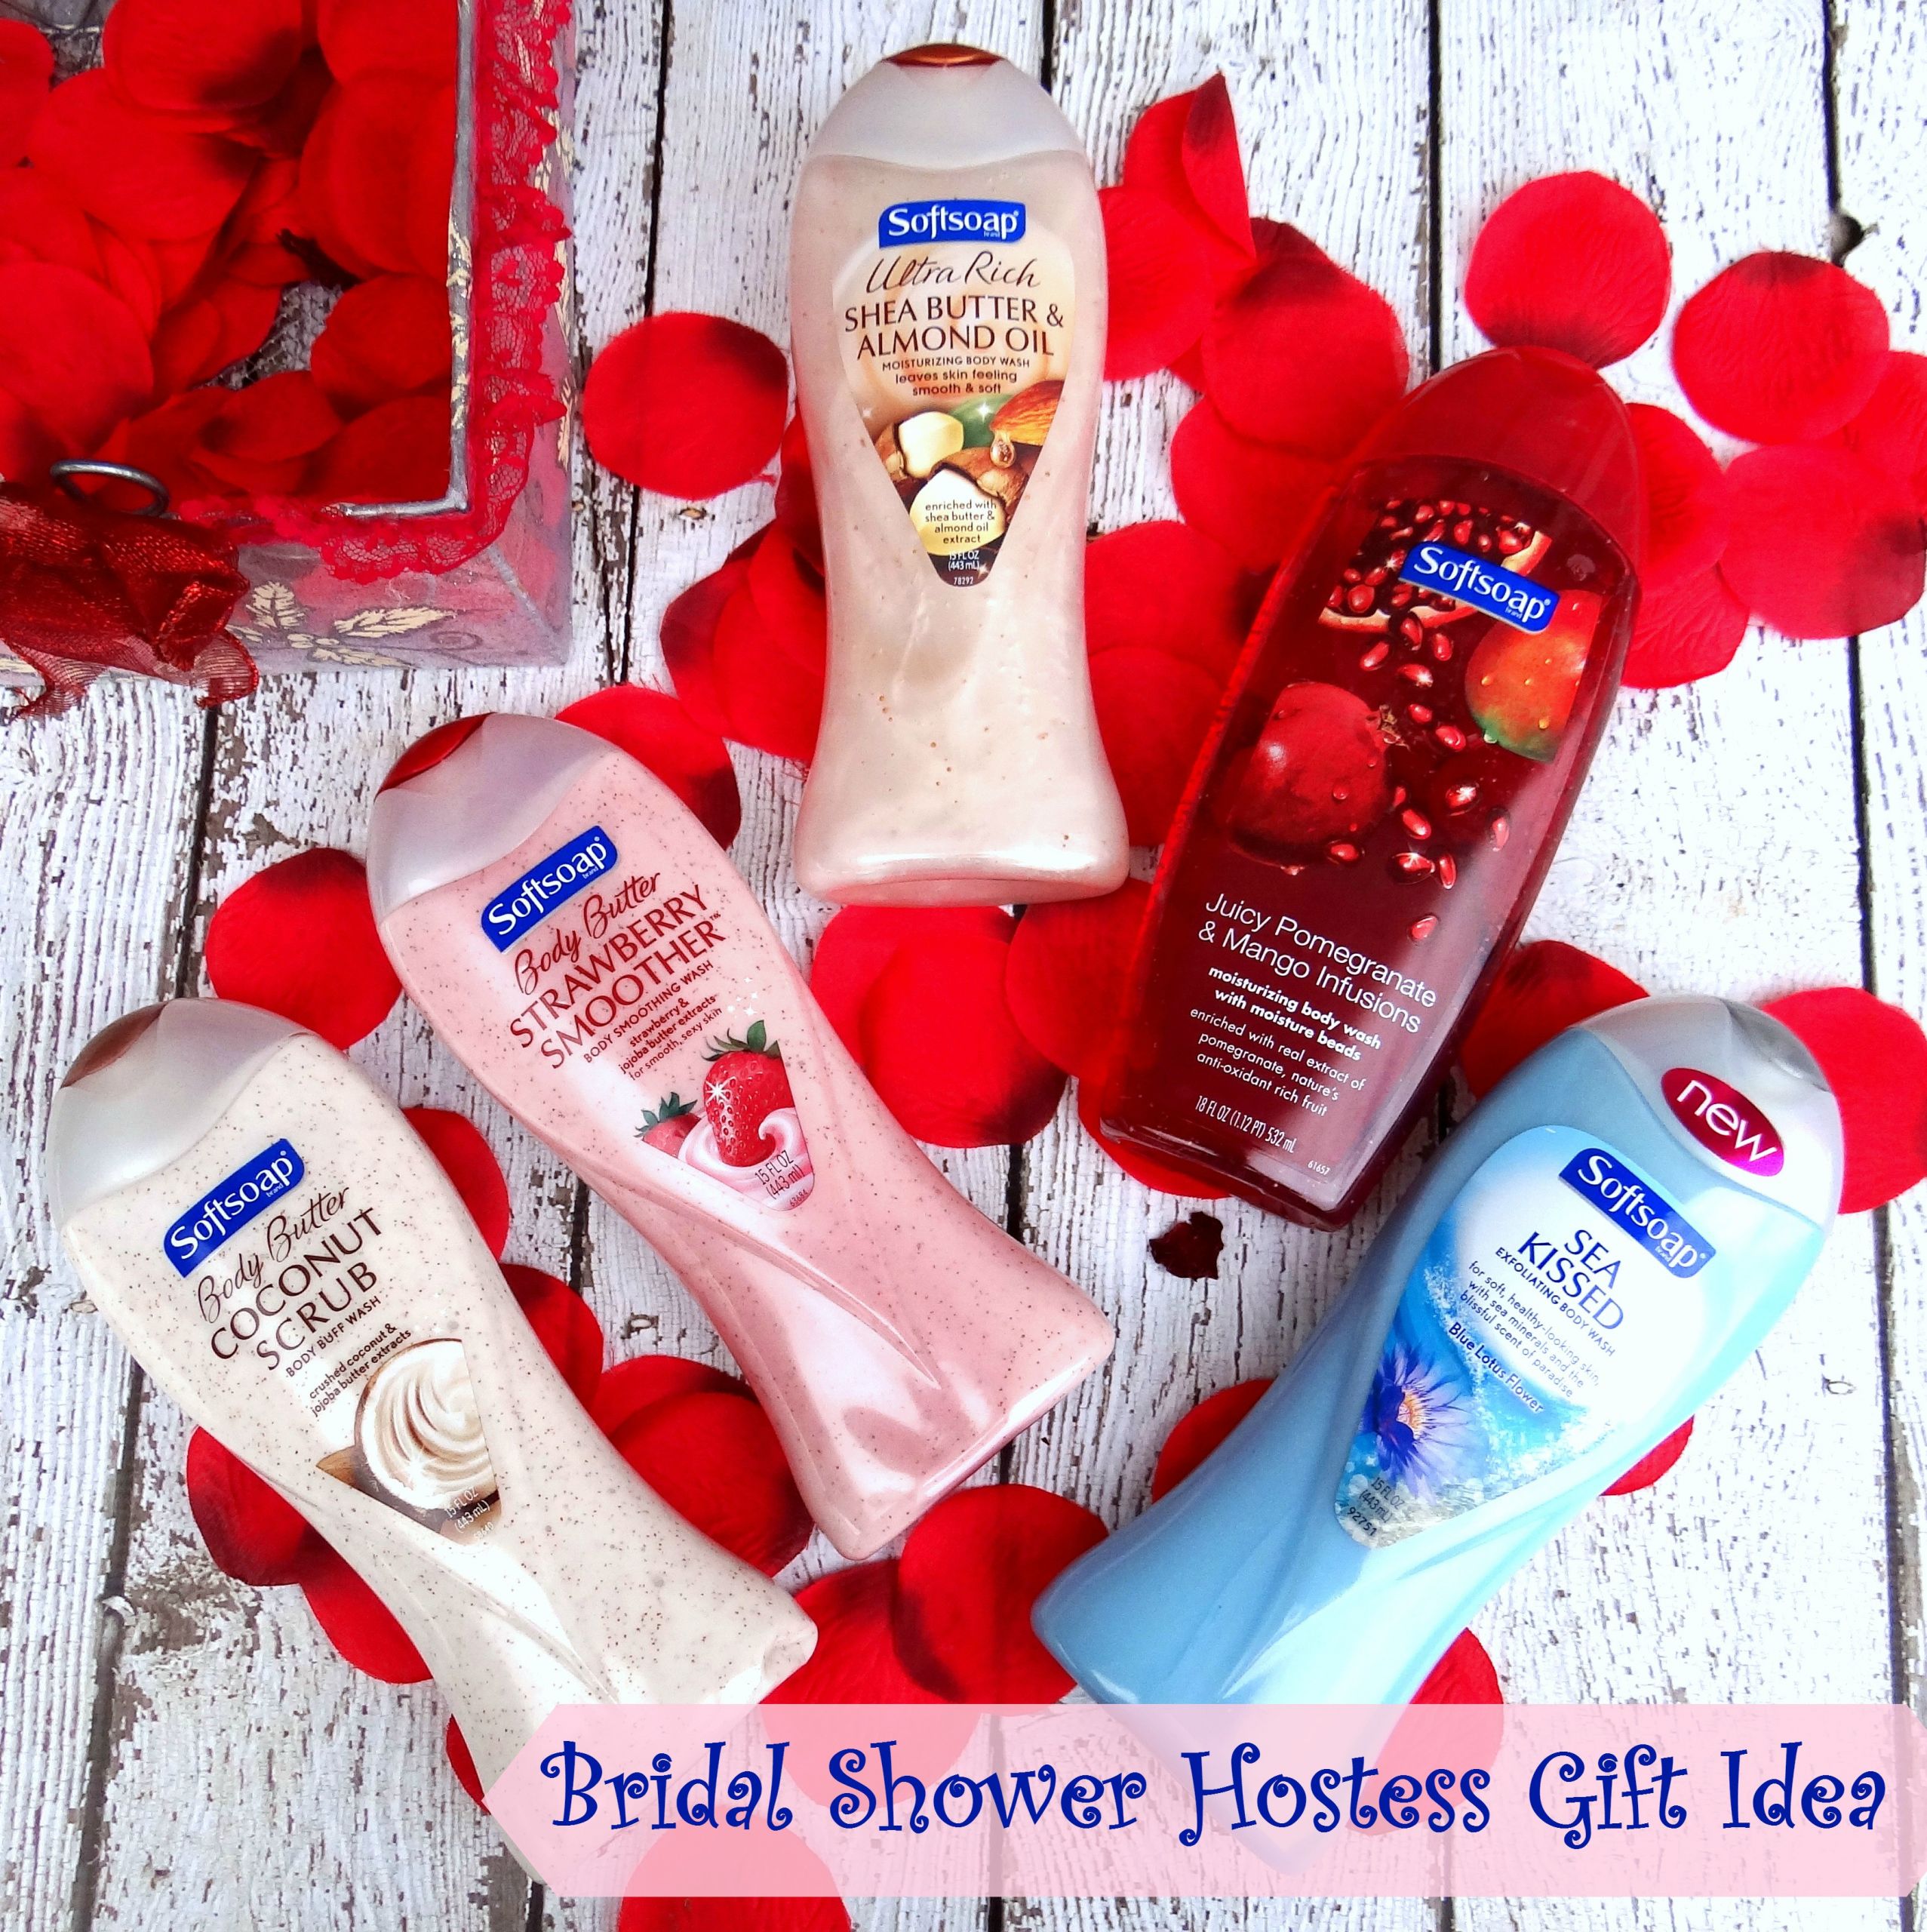 Wedding Shower Host Gift Ideas
 "Showering" your hostess with love Bridal Shower Hostess